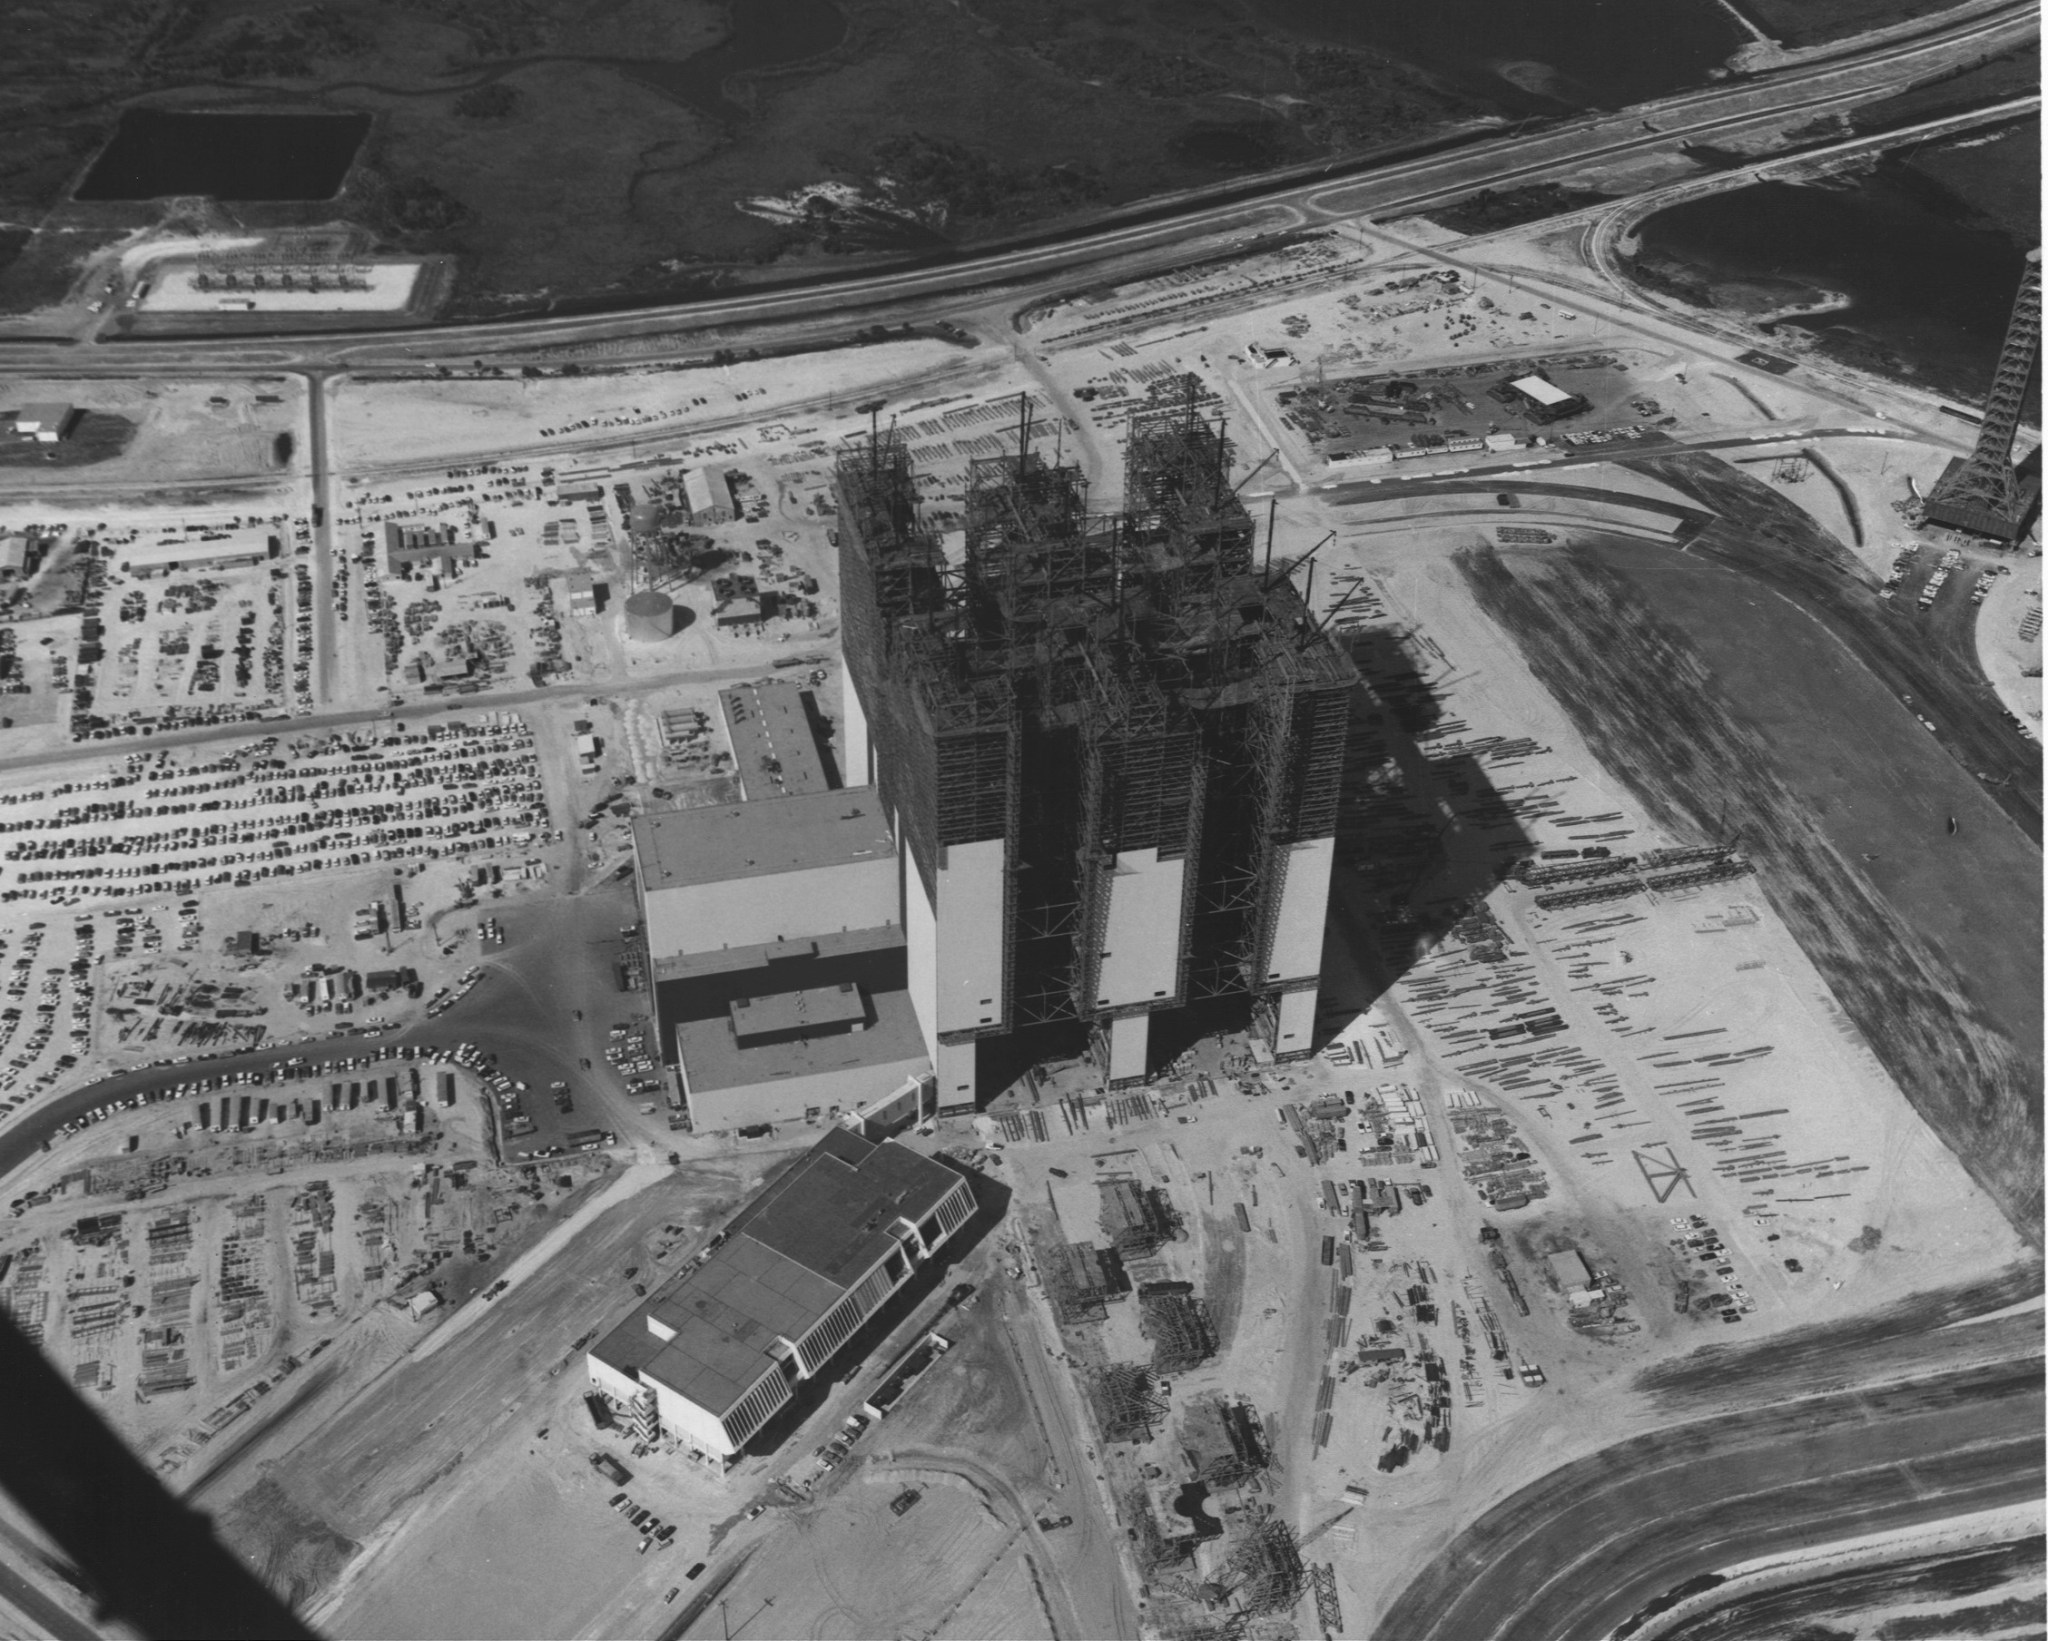 An aerial view of the Vehicle Assembly Building (VAB) during construction in 1965 at NASA’s Kennedy Space Center in Florida. In front of the VAB is the Launch Control Center.